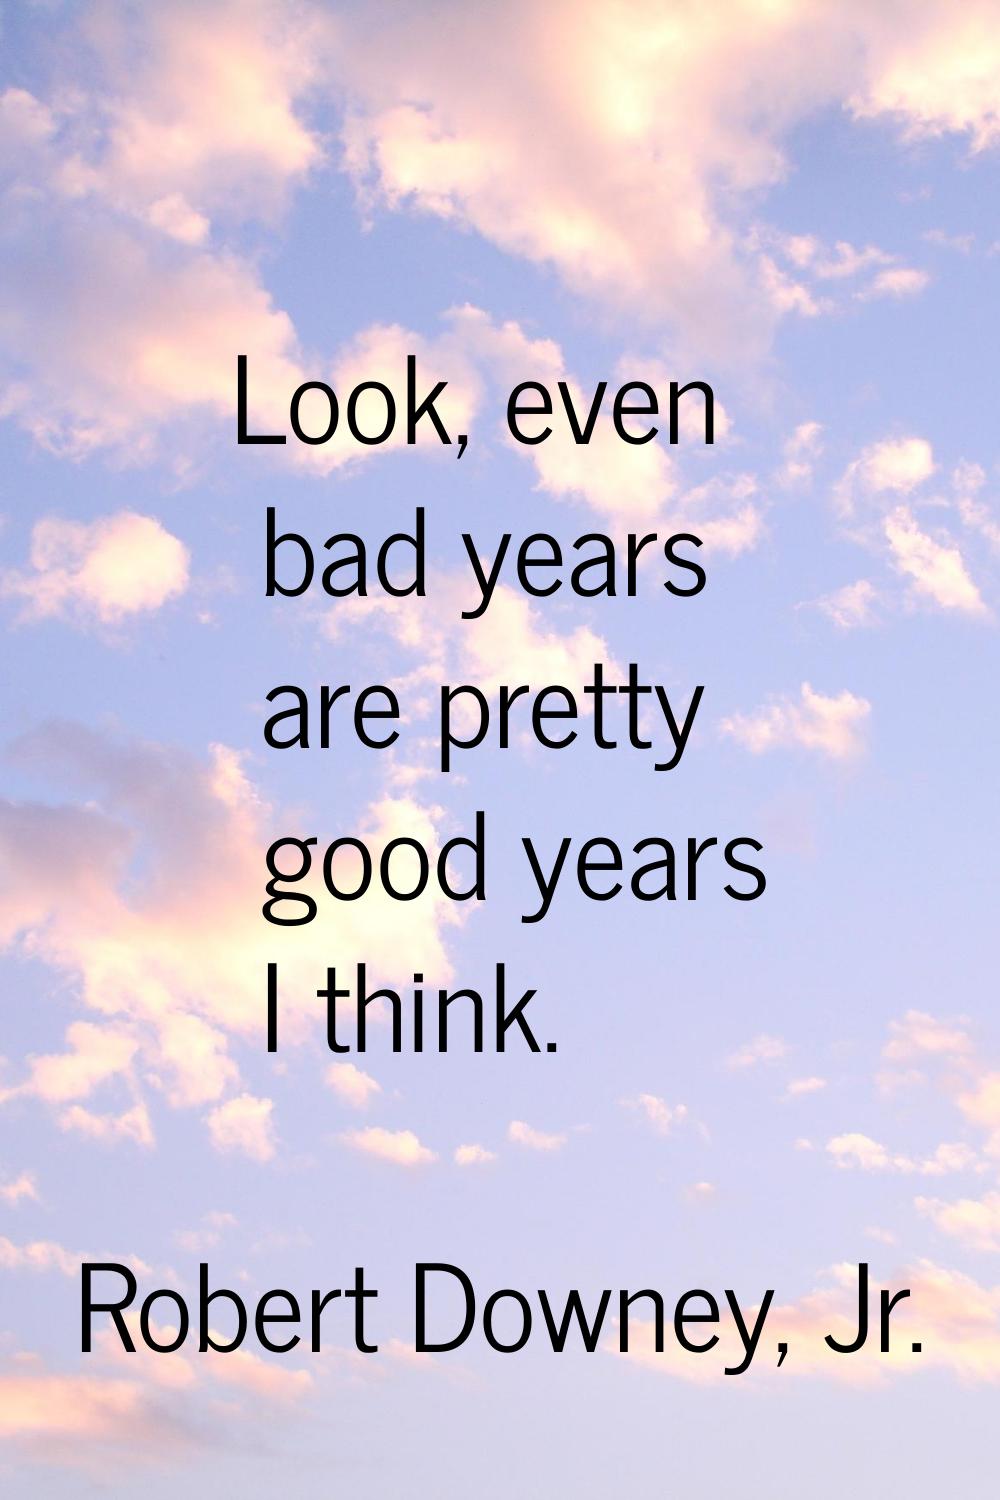 Look, even bad years are pretty good years I think.